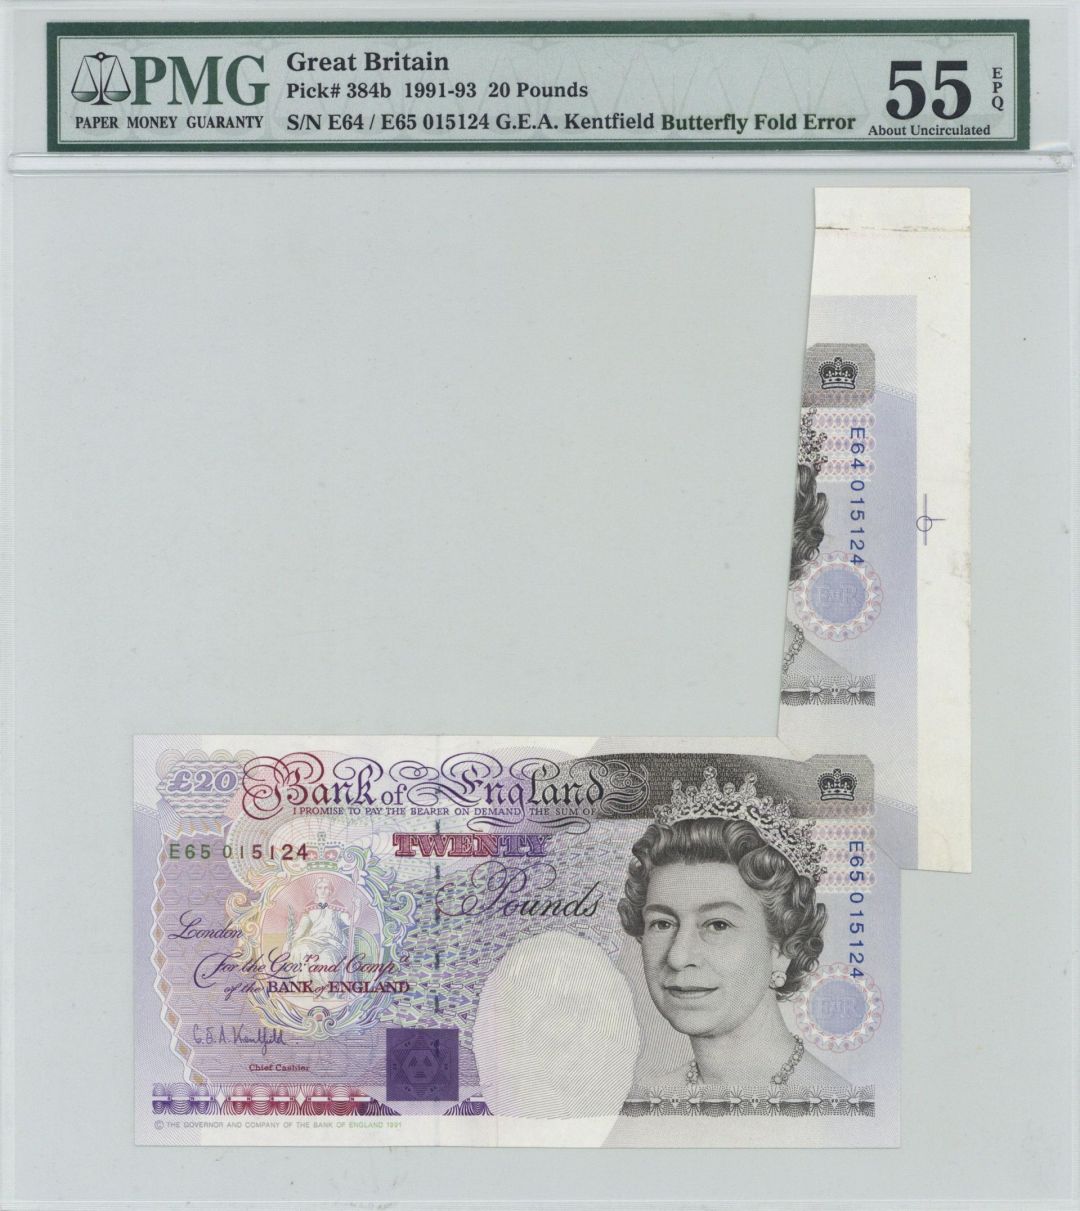 Great Britain - Large Printed Fold Error - 55 PMG Graded P-384b - Foreign Paper Money Error